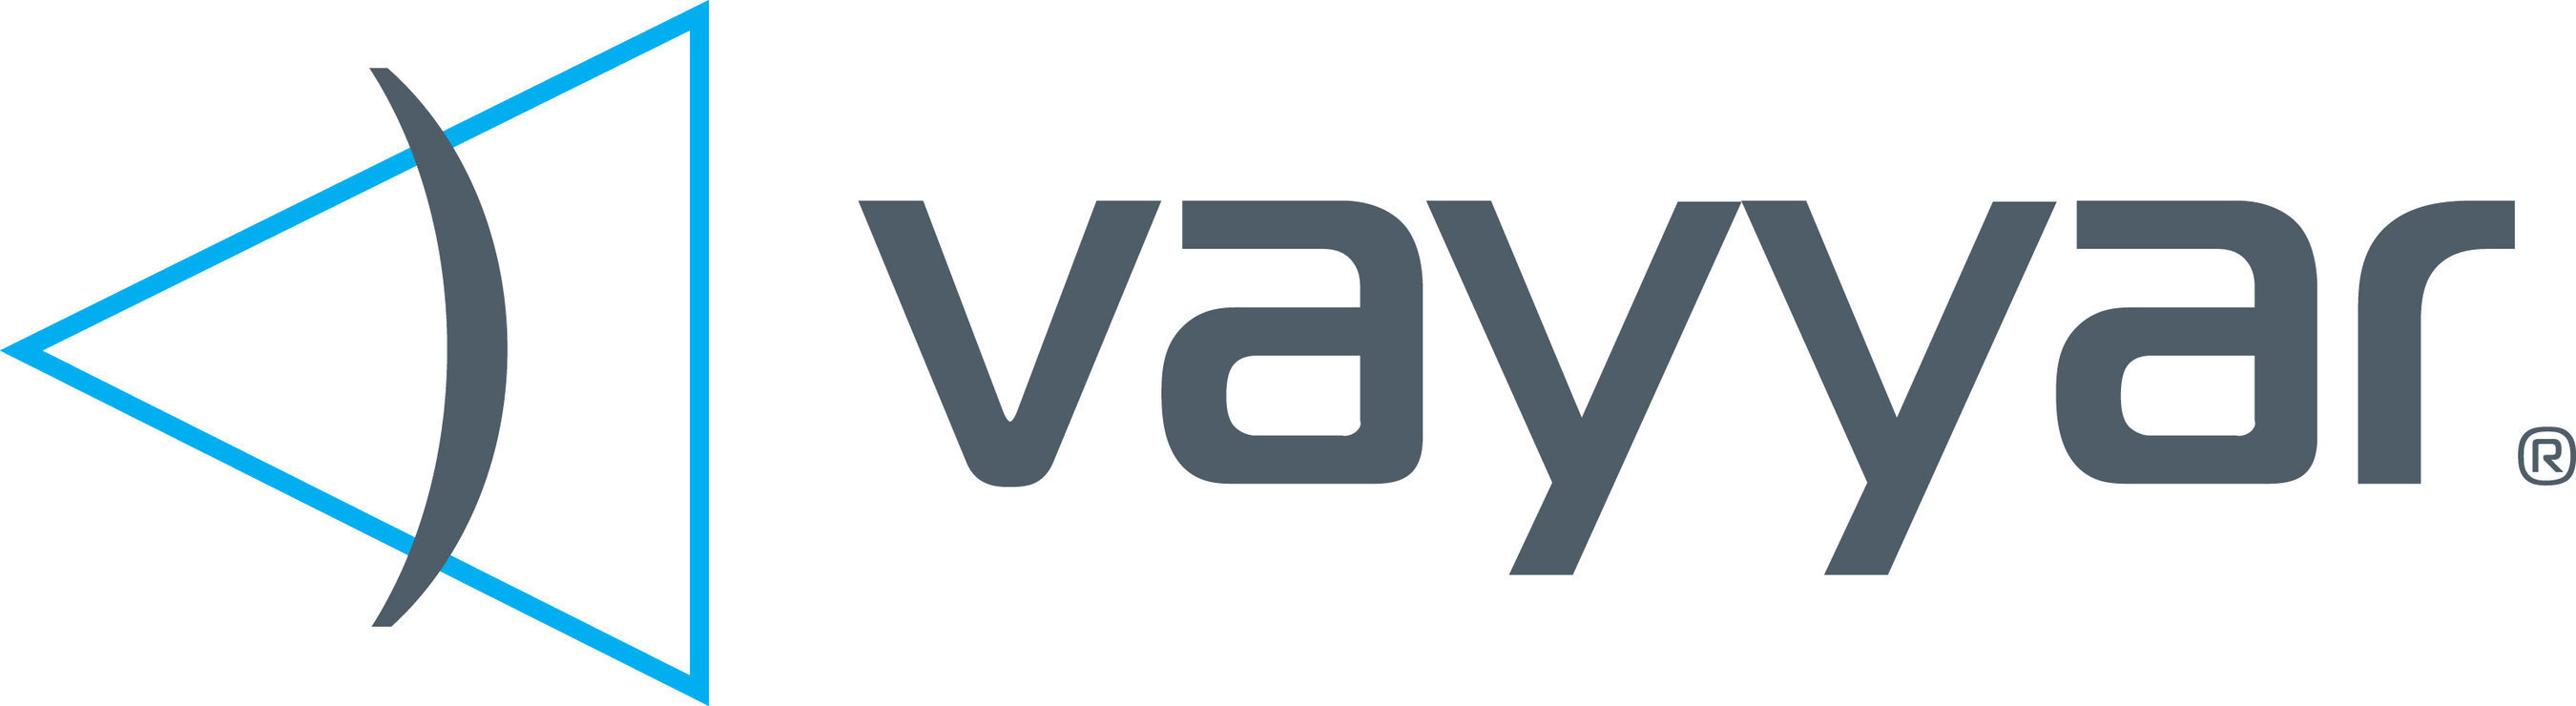 Vayyar, the breakthrough 3D imaging sensor company whose technology makes it possible to see through objects (PRNewsFoto/Vayyar Imaging)